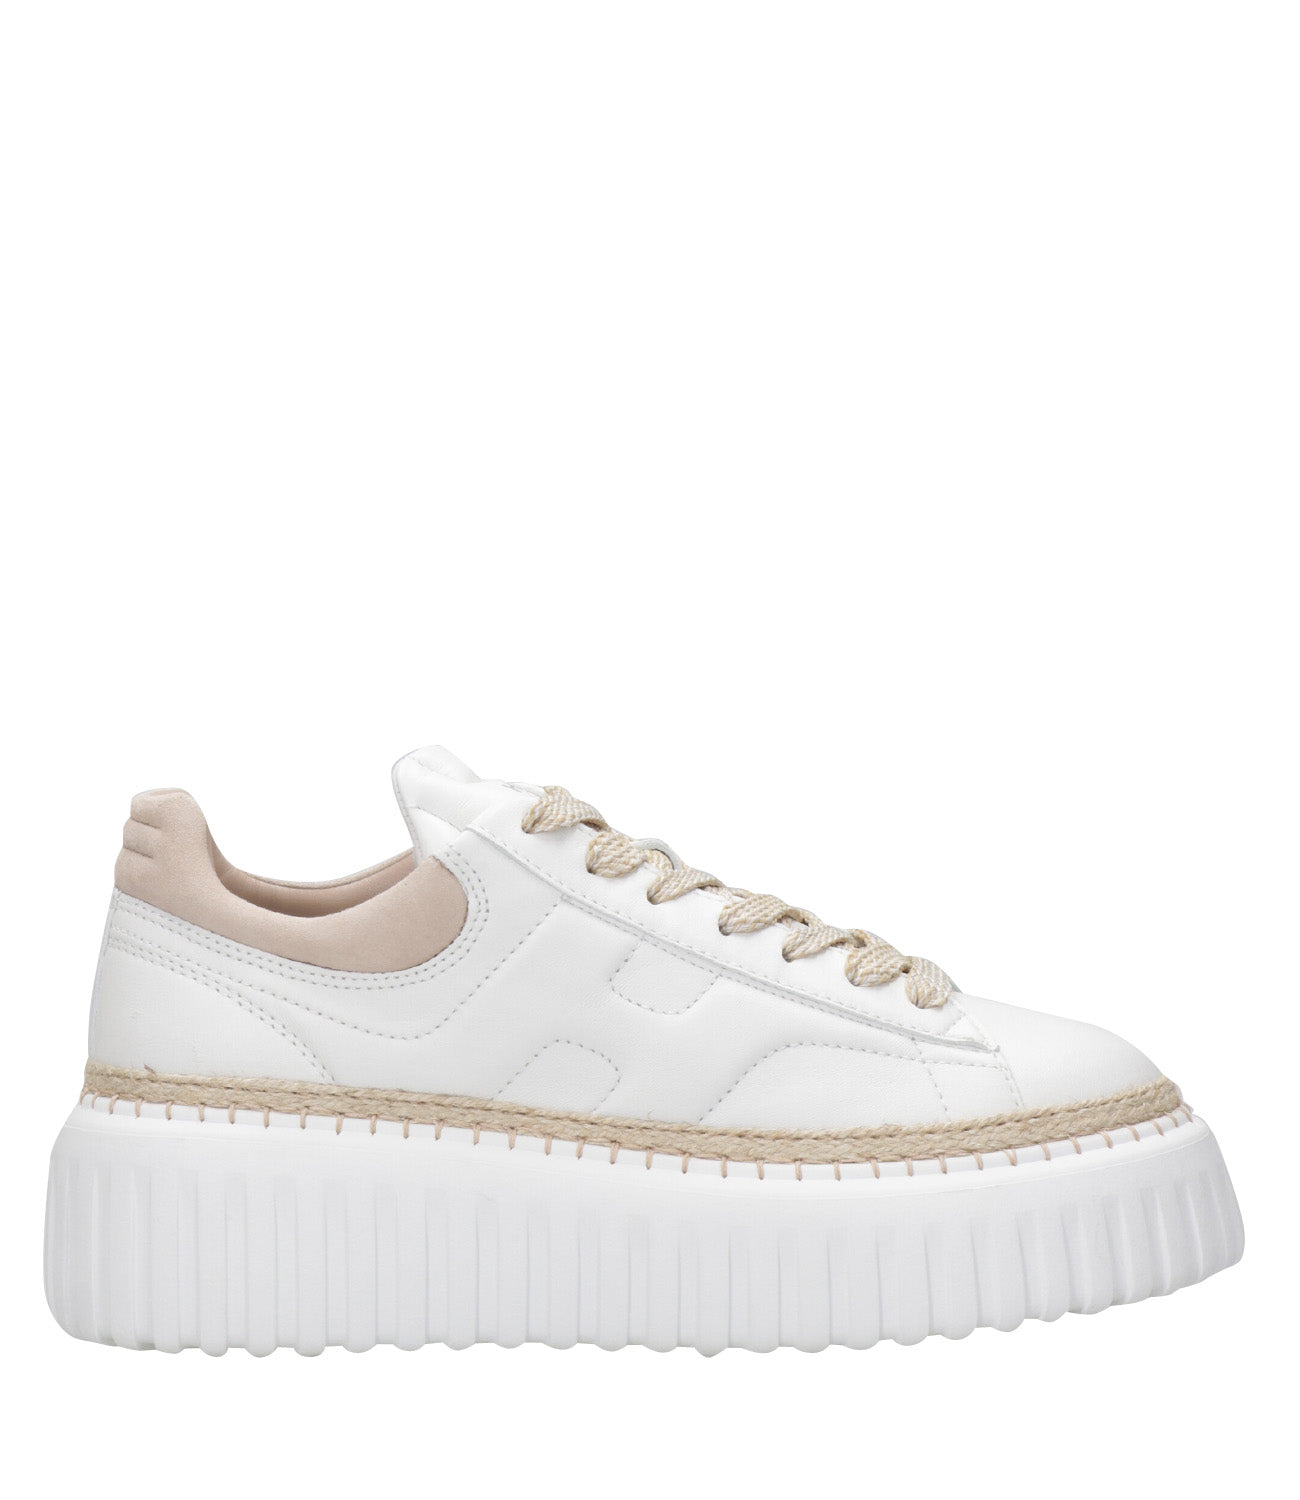 Hogan | Sneakers H-Stripes H659 White and Old Pink